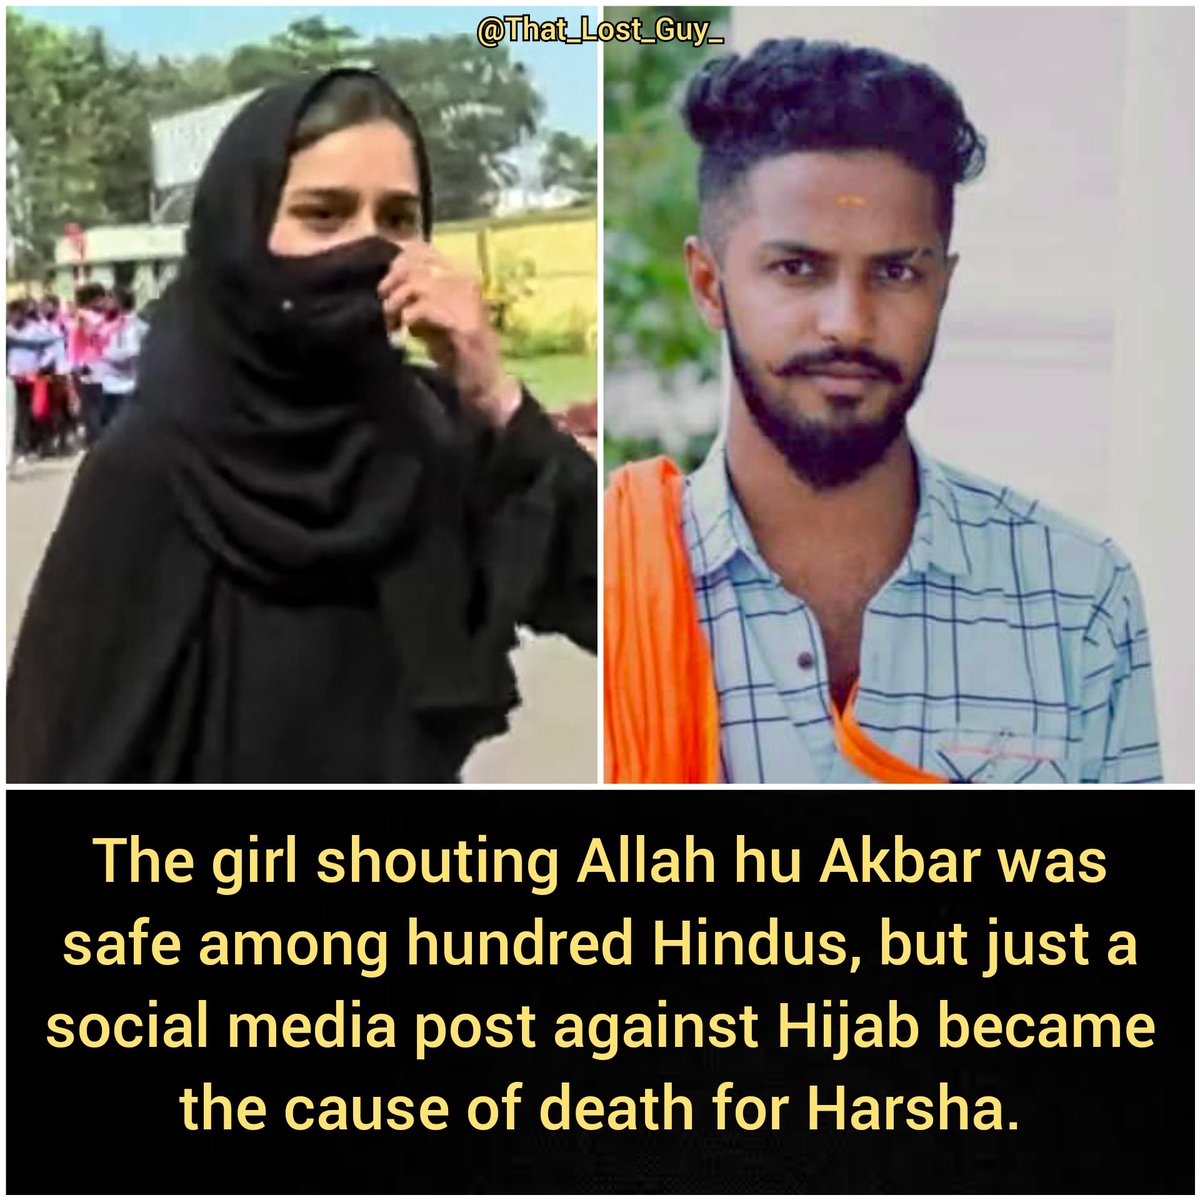 Hijab became nation news. They took life of Harsha just for a Fb post... and no media house is showing there interest in this matter
#HijabFreeBharat